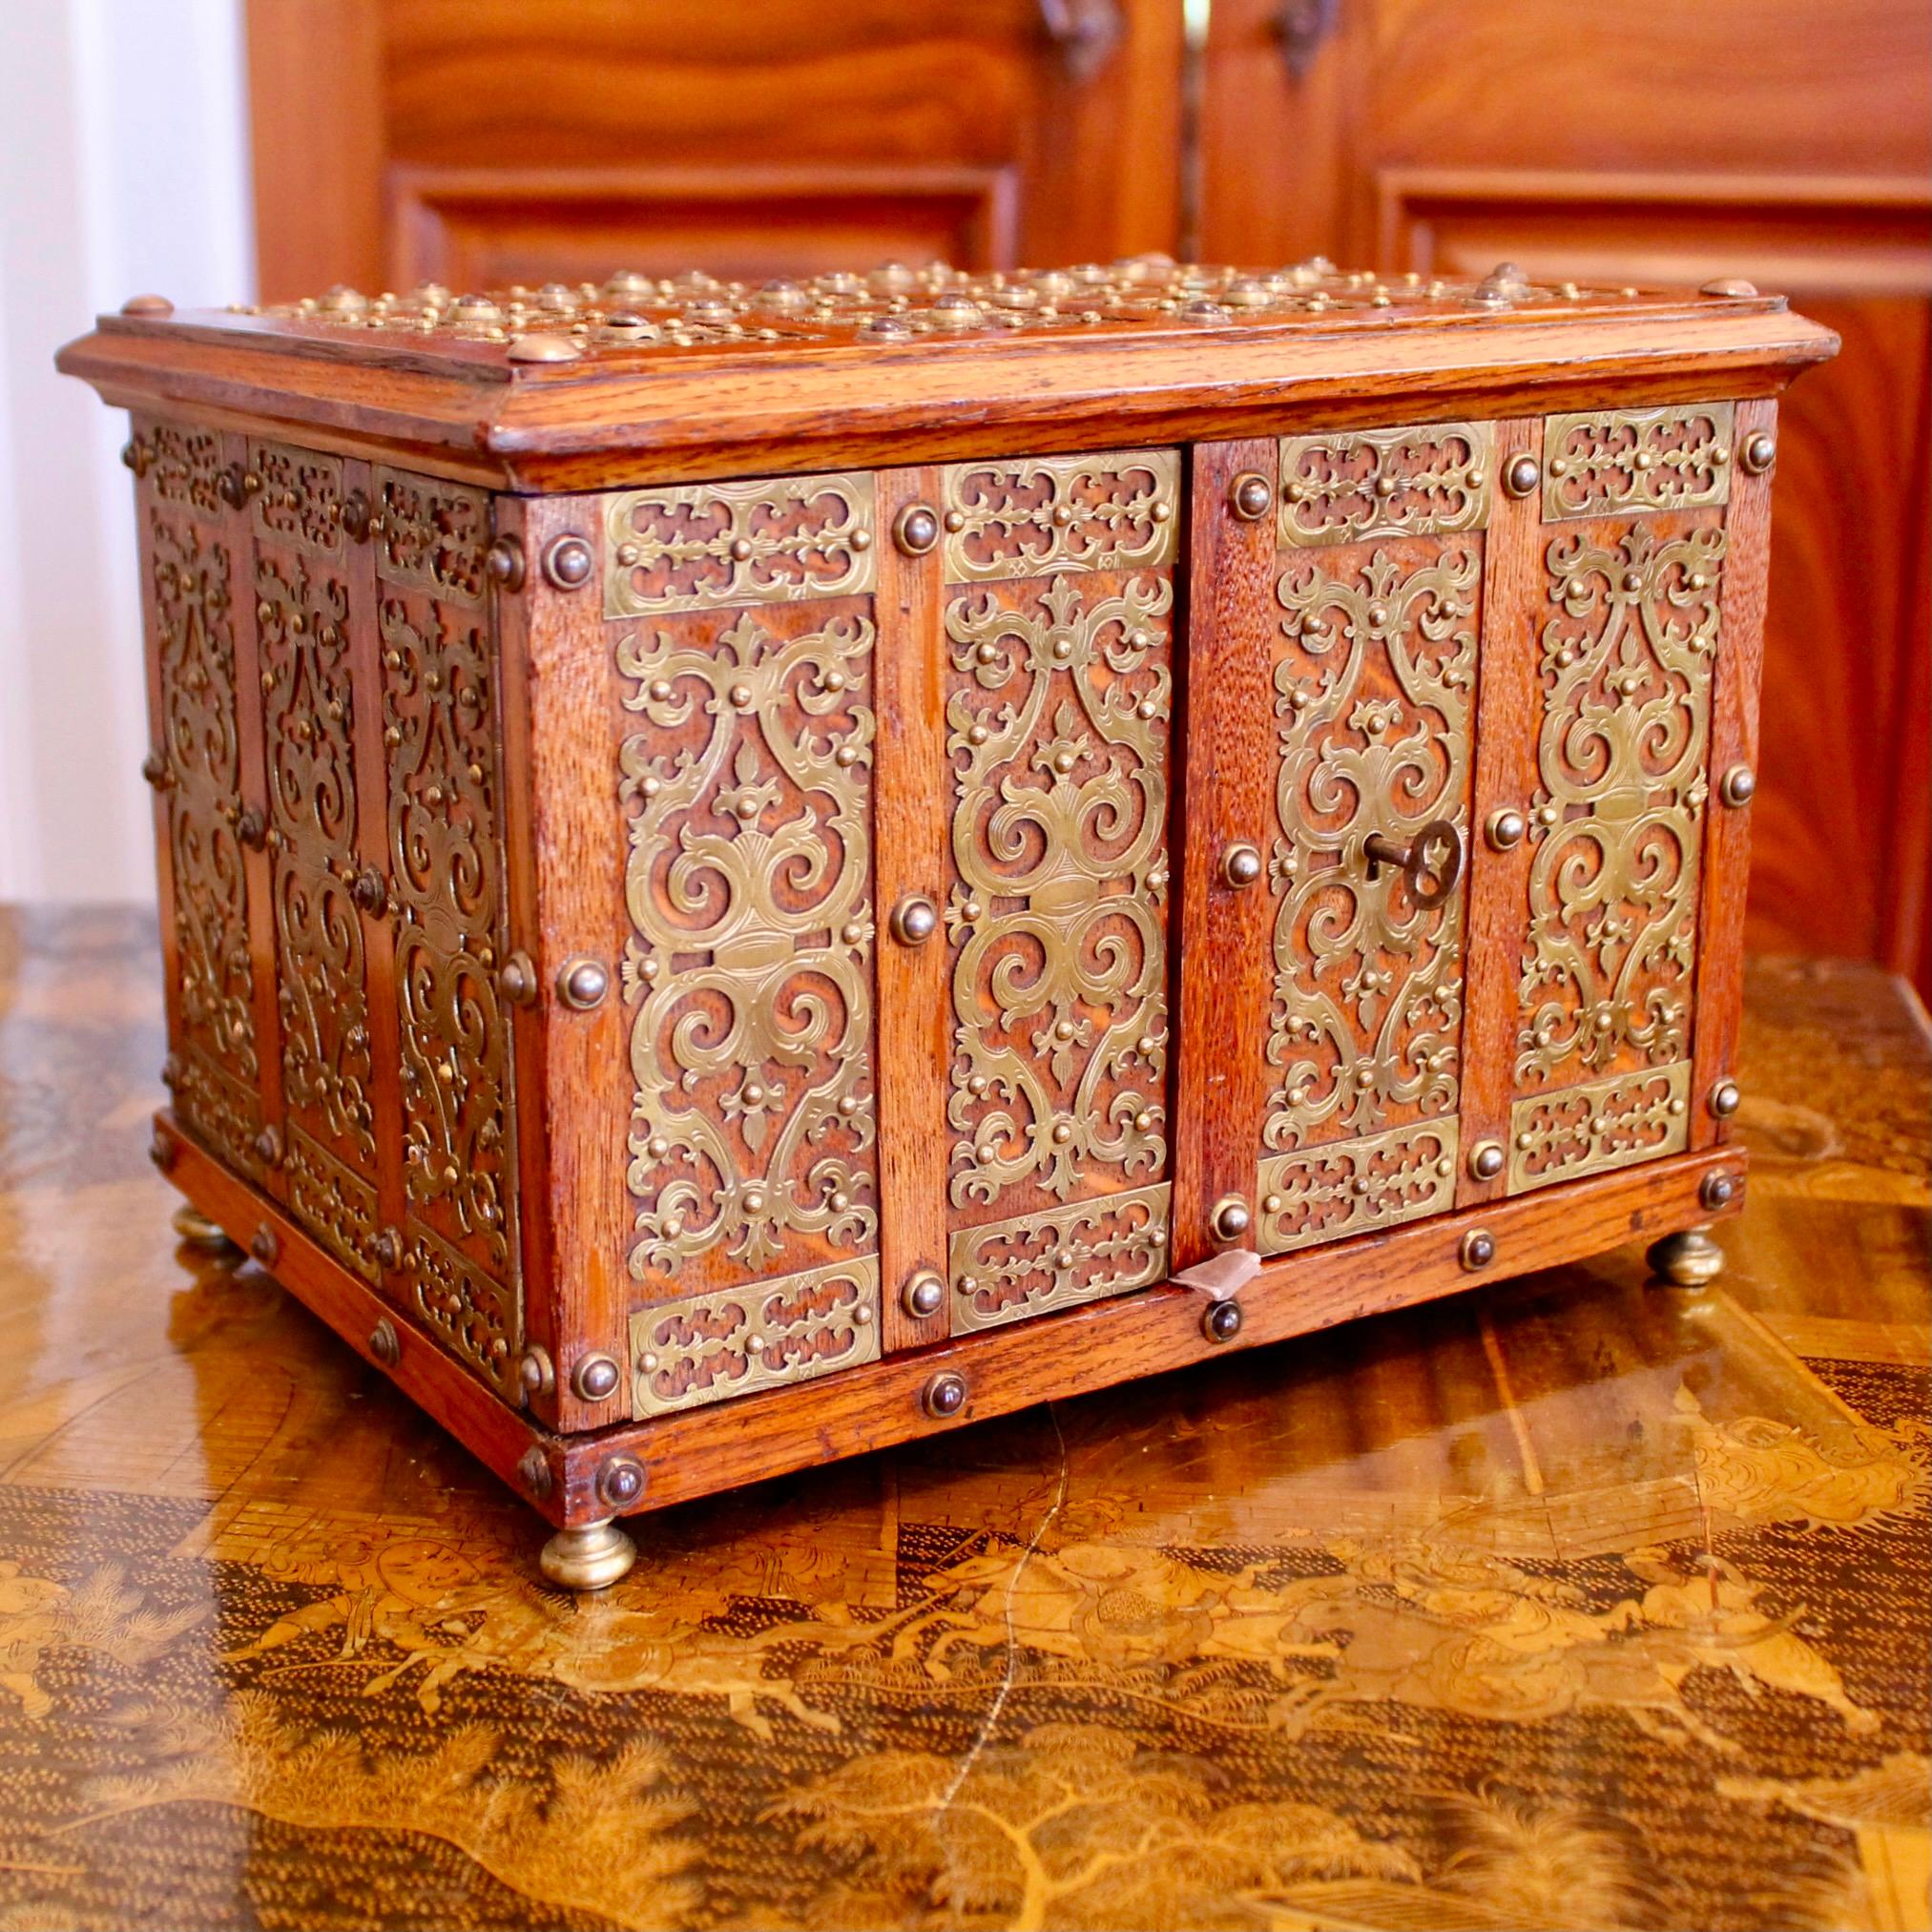 A fine and very decorative Victorian era (late 19th century) jewelry box of quarter sawn oak, designed in the historic tradition of fortified strong boxes, clad in studs and metal strap work panels and fitted with a working lock. The interior